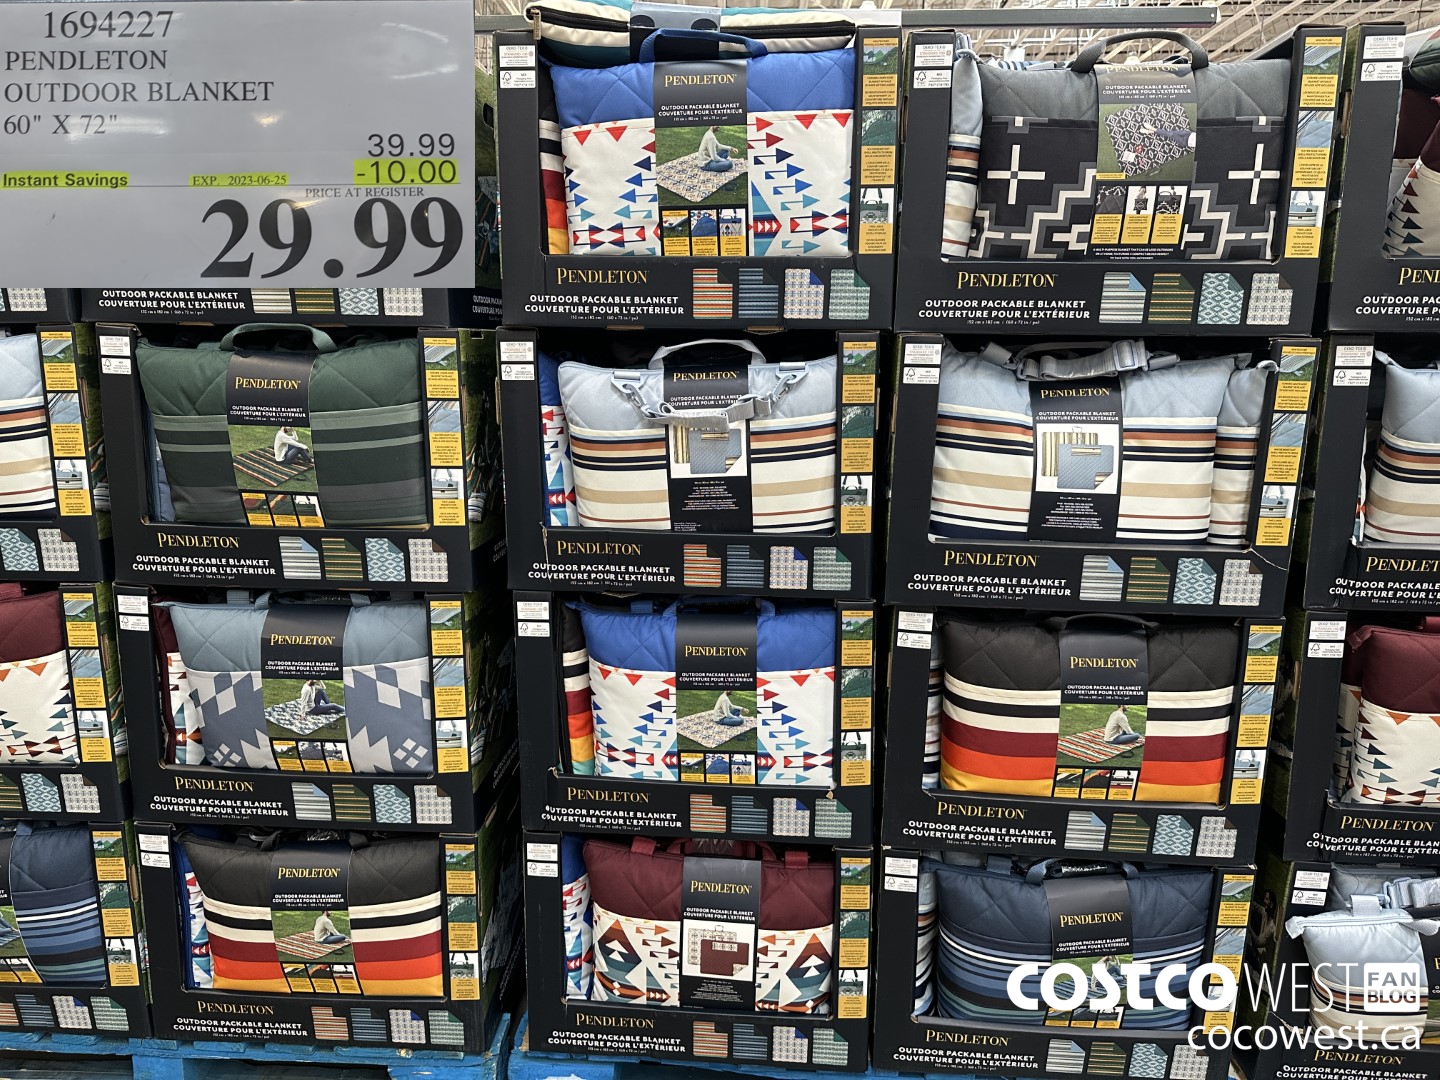 Costco Flyer & Costco Sale Items for May 29 - June 4, 2023 for BC, AB, MB,  SK - Costco West Fan Blog